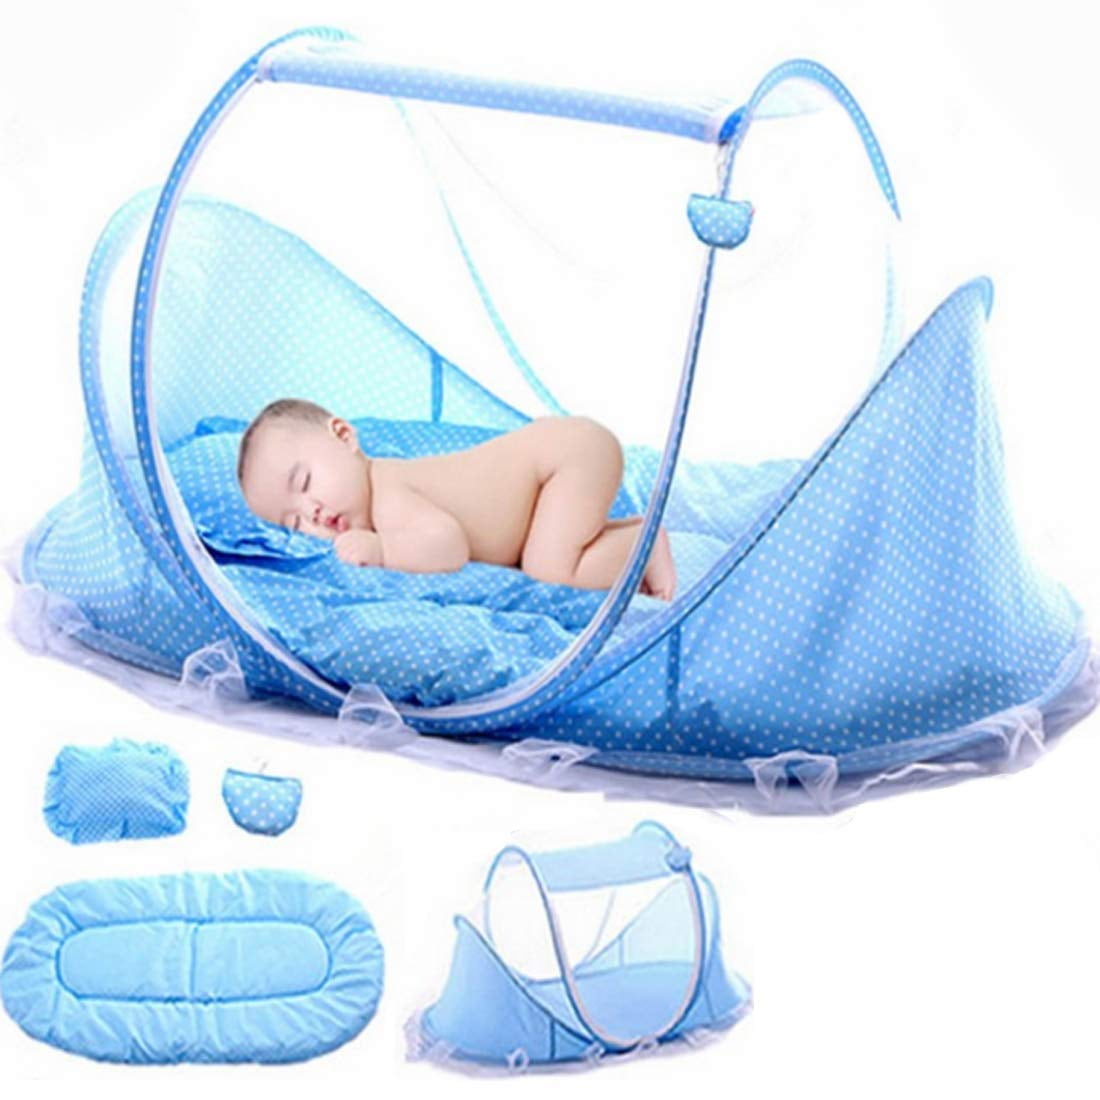 Baby Cradle Bed Mosquito Net Prevent Mosquitos Fly Safe Comportable Sleep Folded